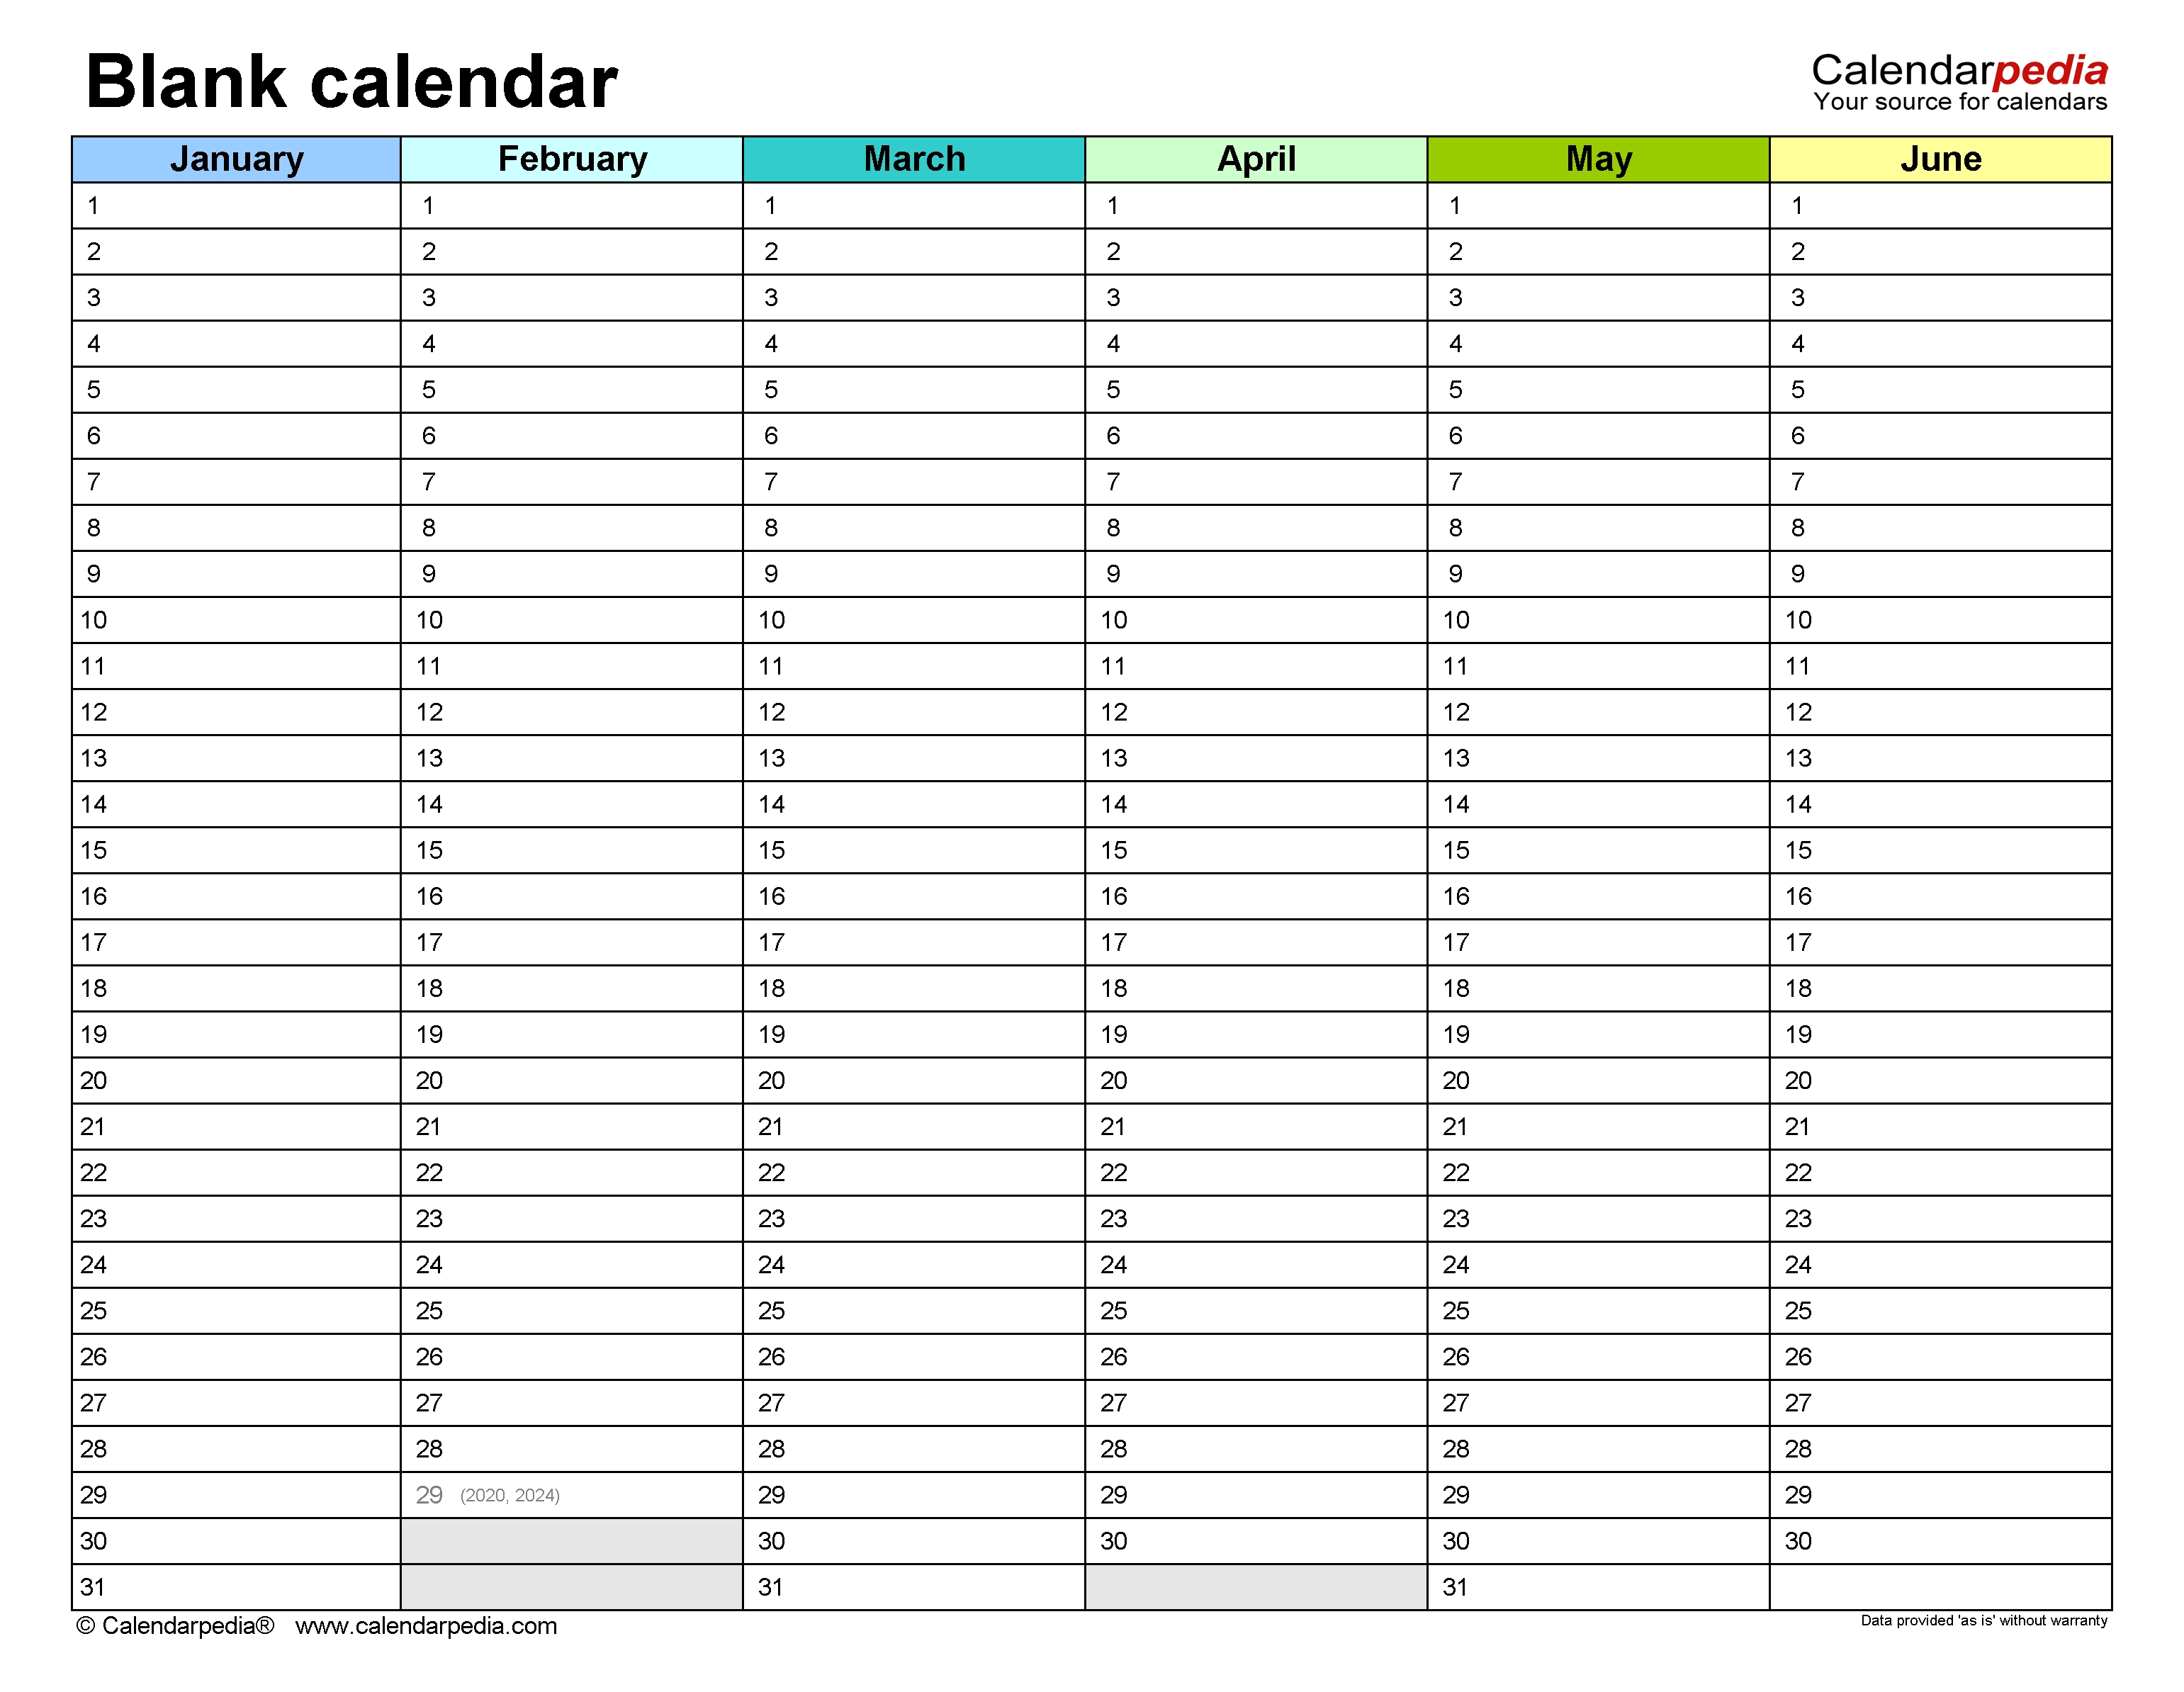 Blank Calendars - Free Printable Microsoft Excel Templates Calendar Template For Pages